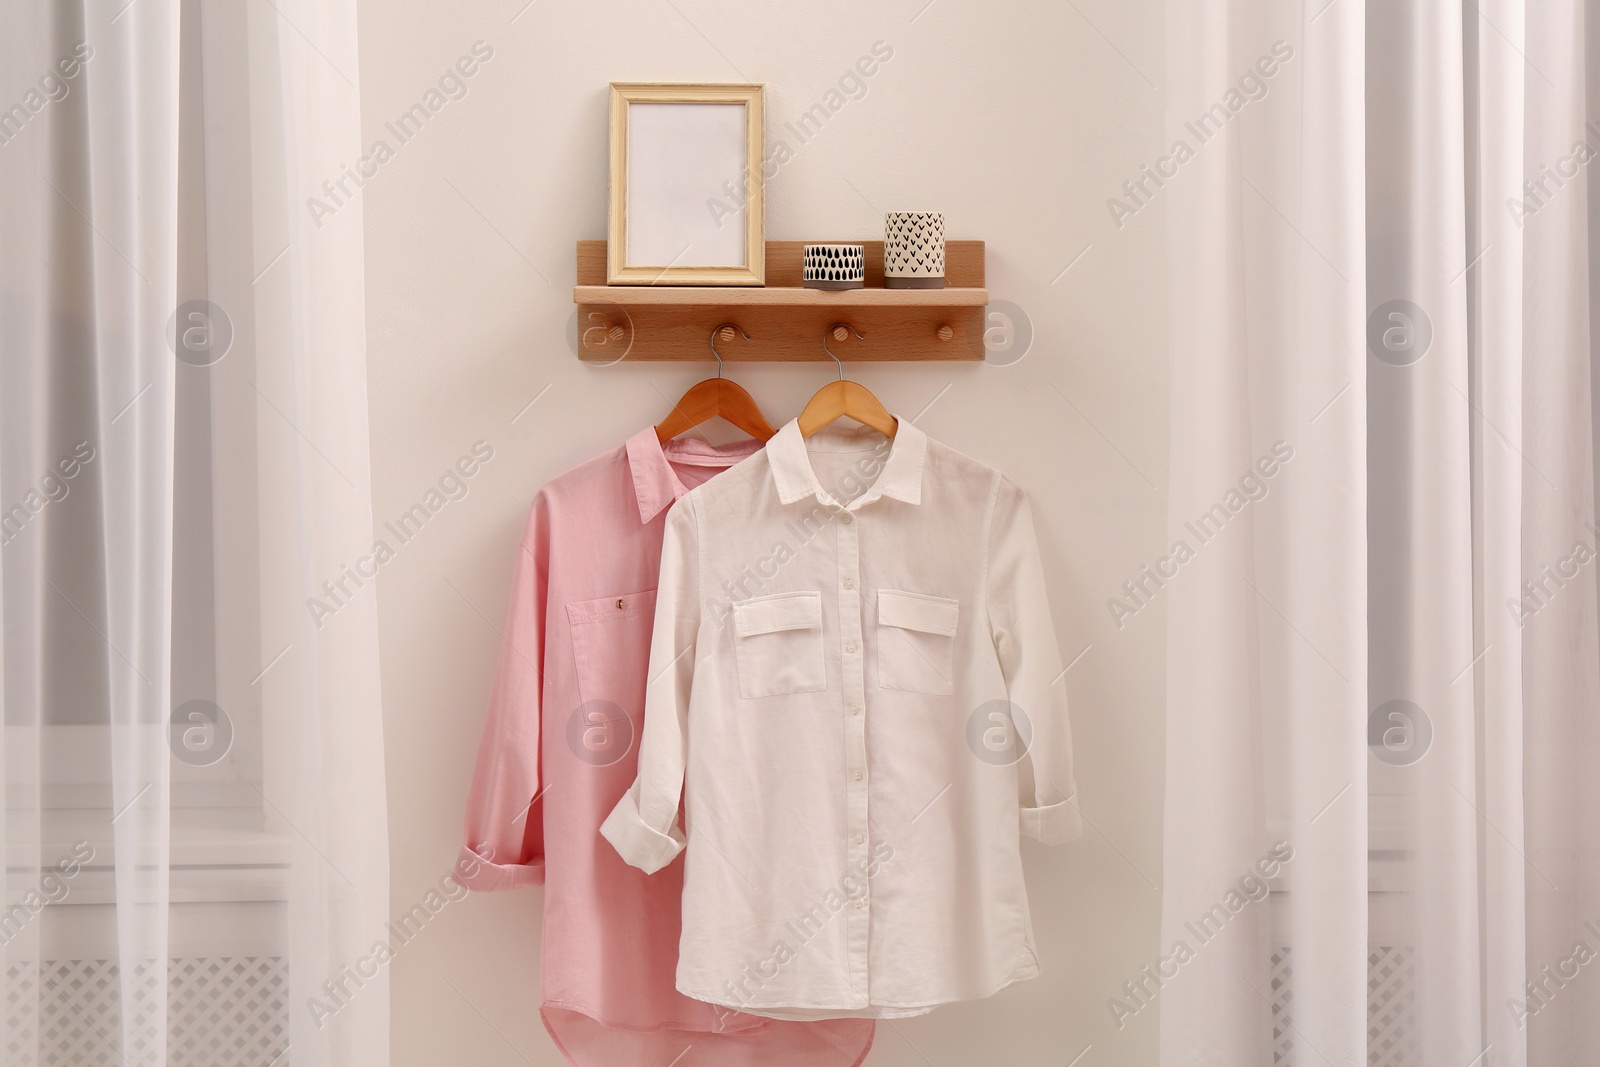 Photo of Wooden shelf with fashionable clothes and decorative elements on light wall in room. Interior design